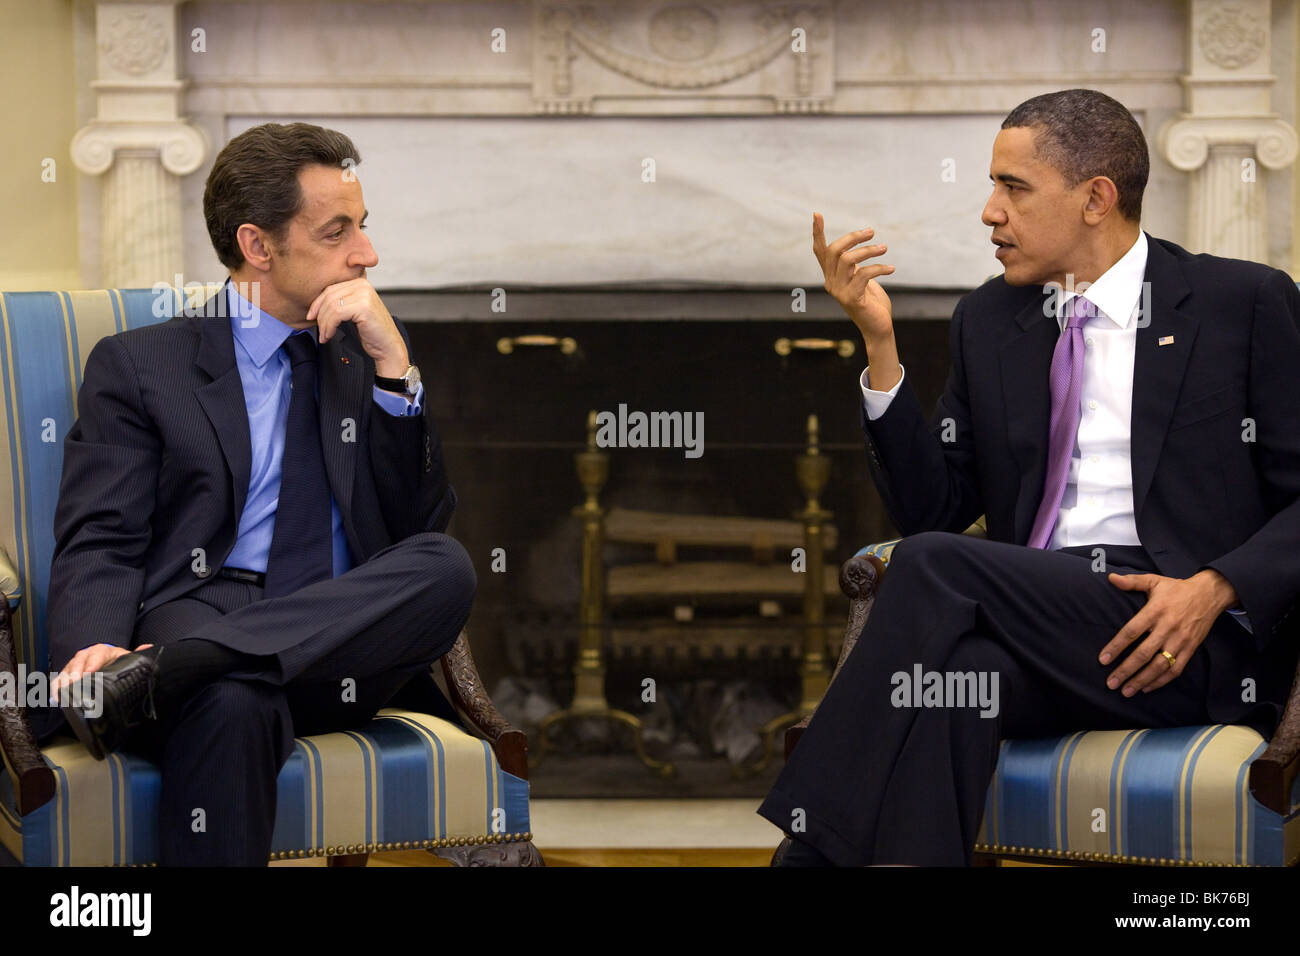 President Barack Obama meets with President Nicolas Sarkozy of France in the Oval Office, March 30, 2010. Stock Photo